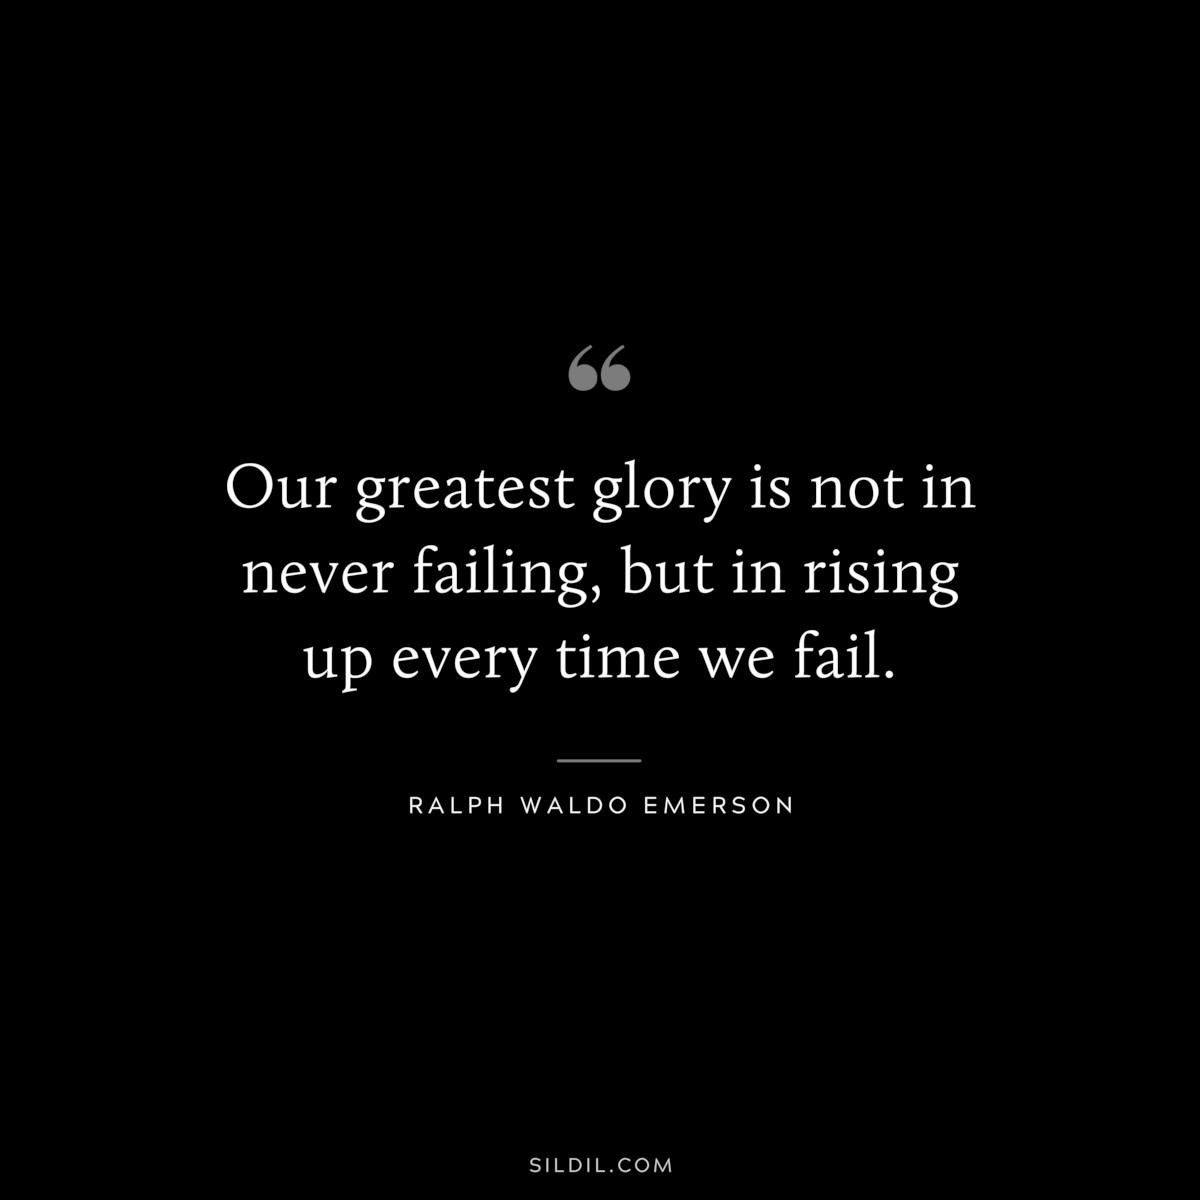 Our greatest glory is not in never failing, but in rising up every time we fail. — Ralph Waldo Emerson